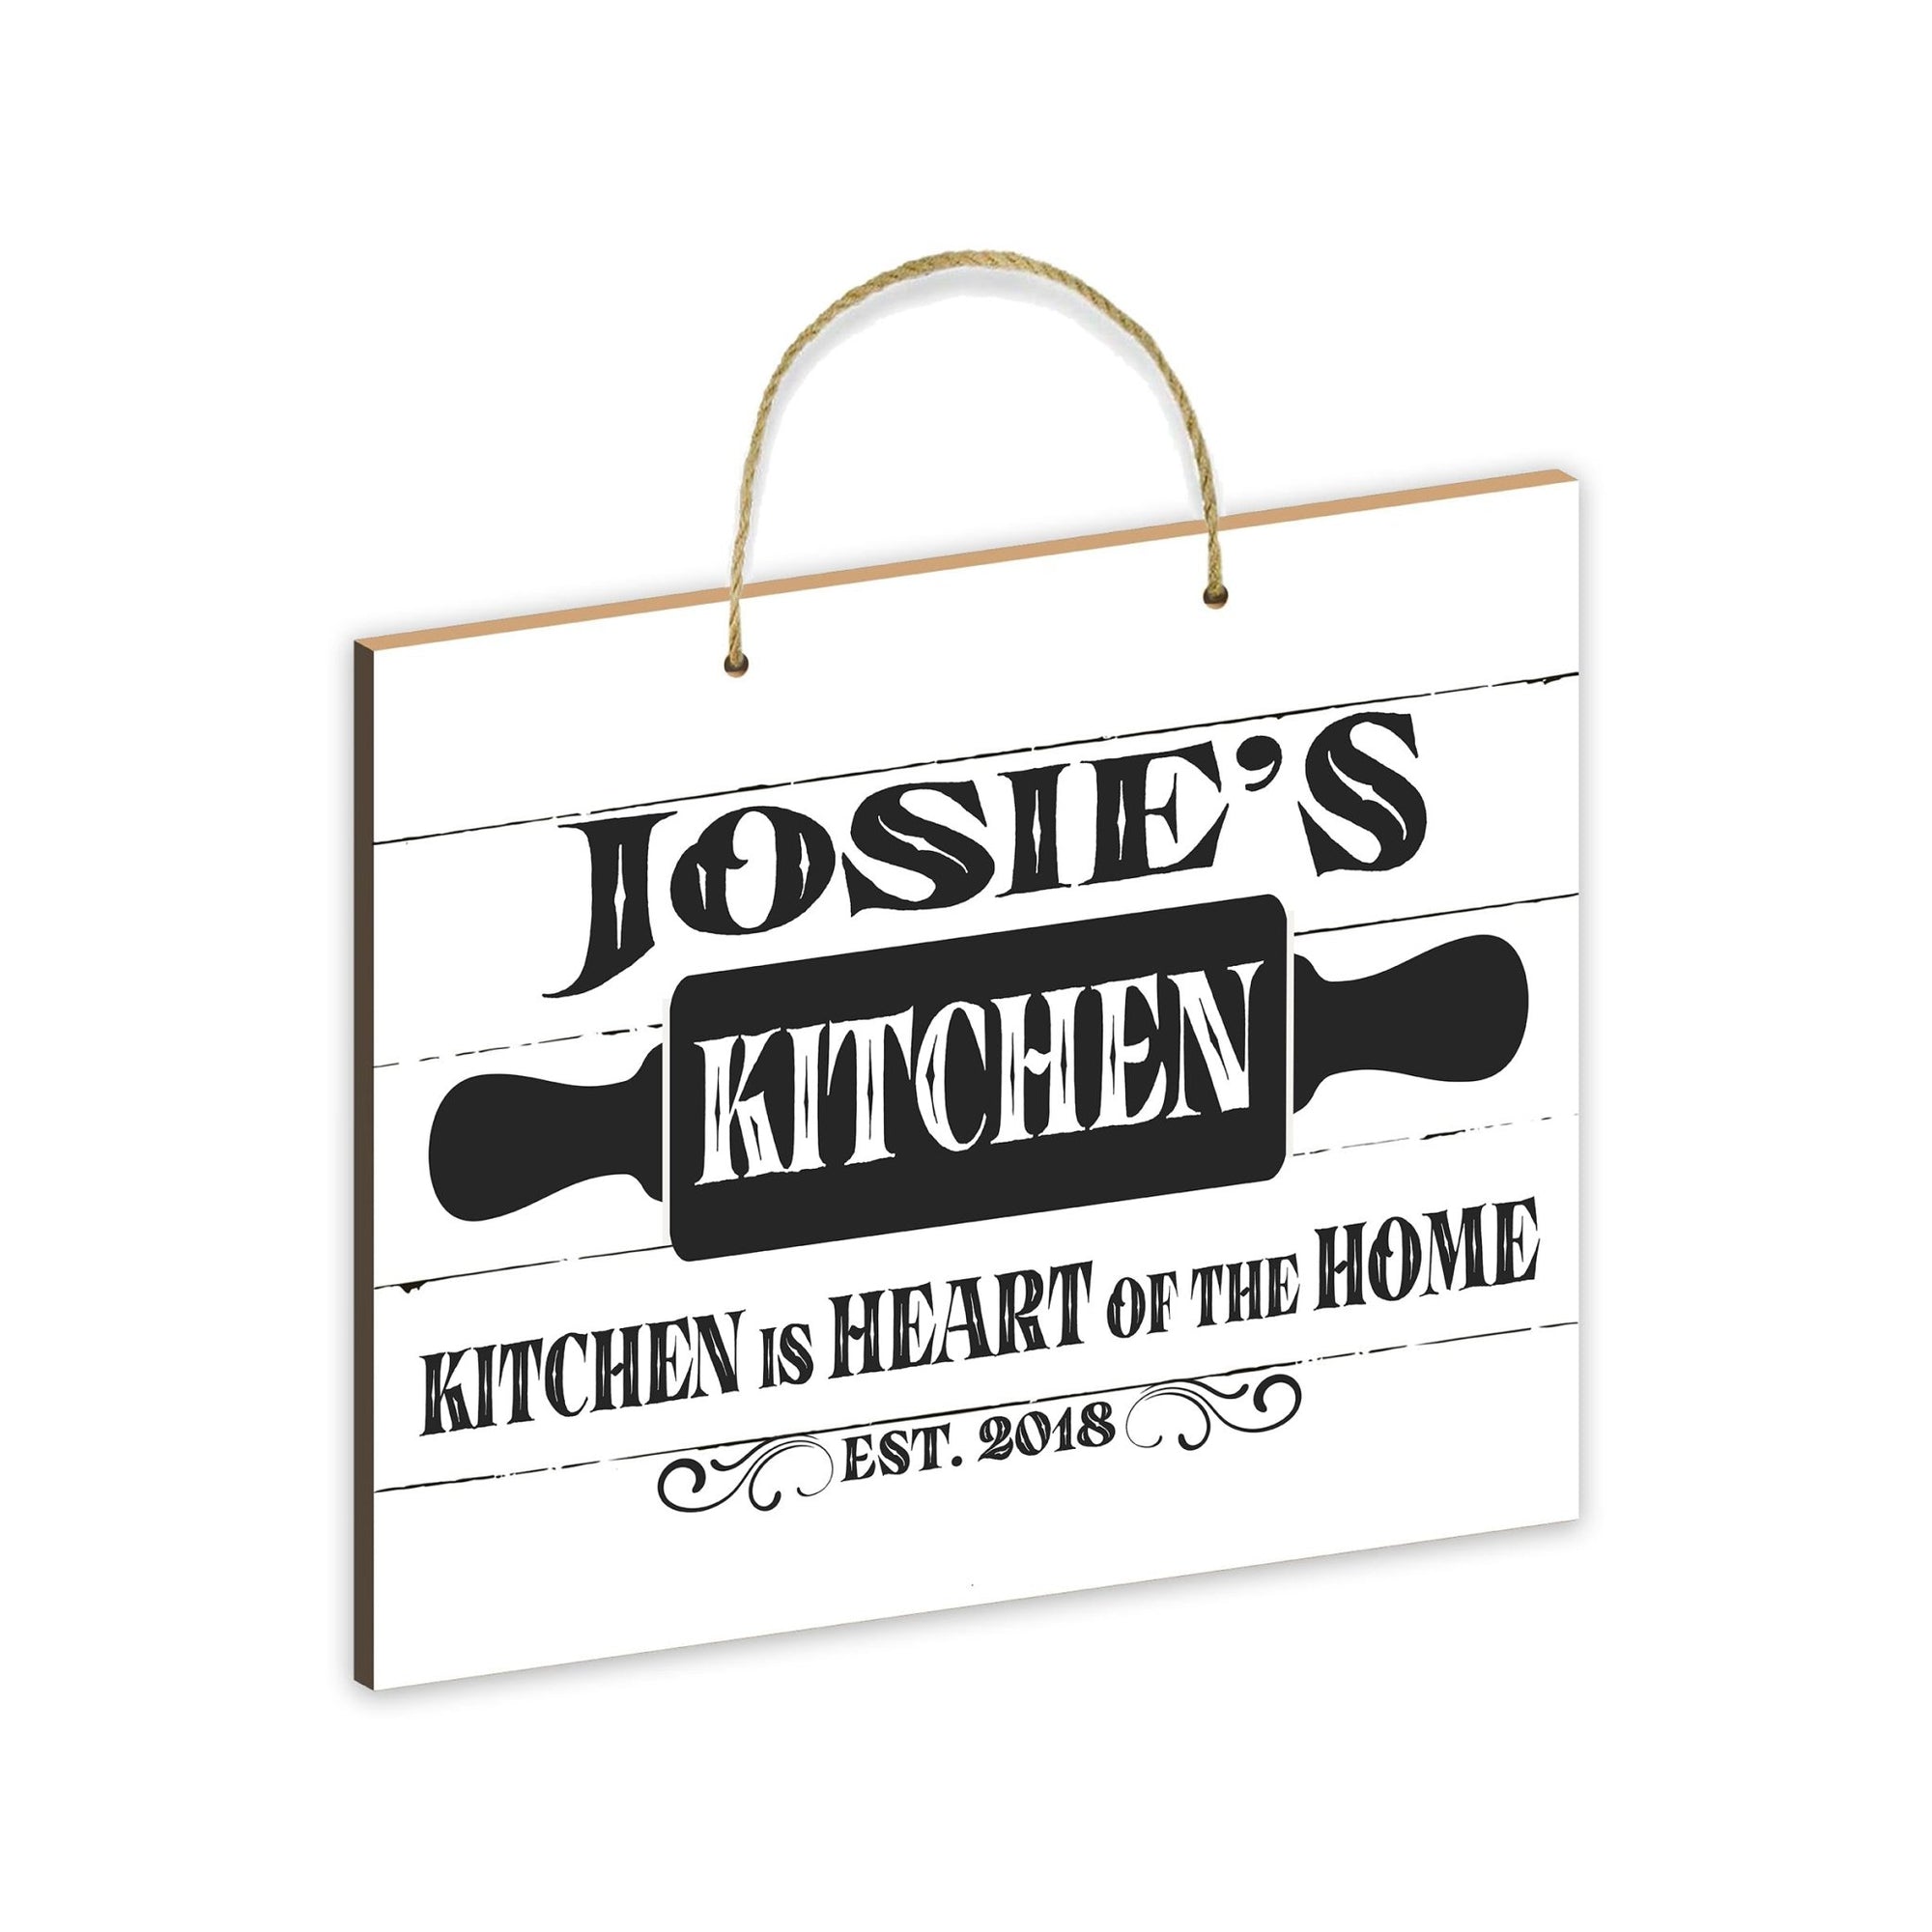 Inspirational Wooden Rustic Wall Hanging Rope Sign Kitchen Home Décor - Kitchen Is Heart - LifeSong Milestones